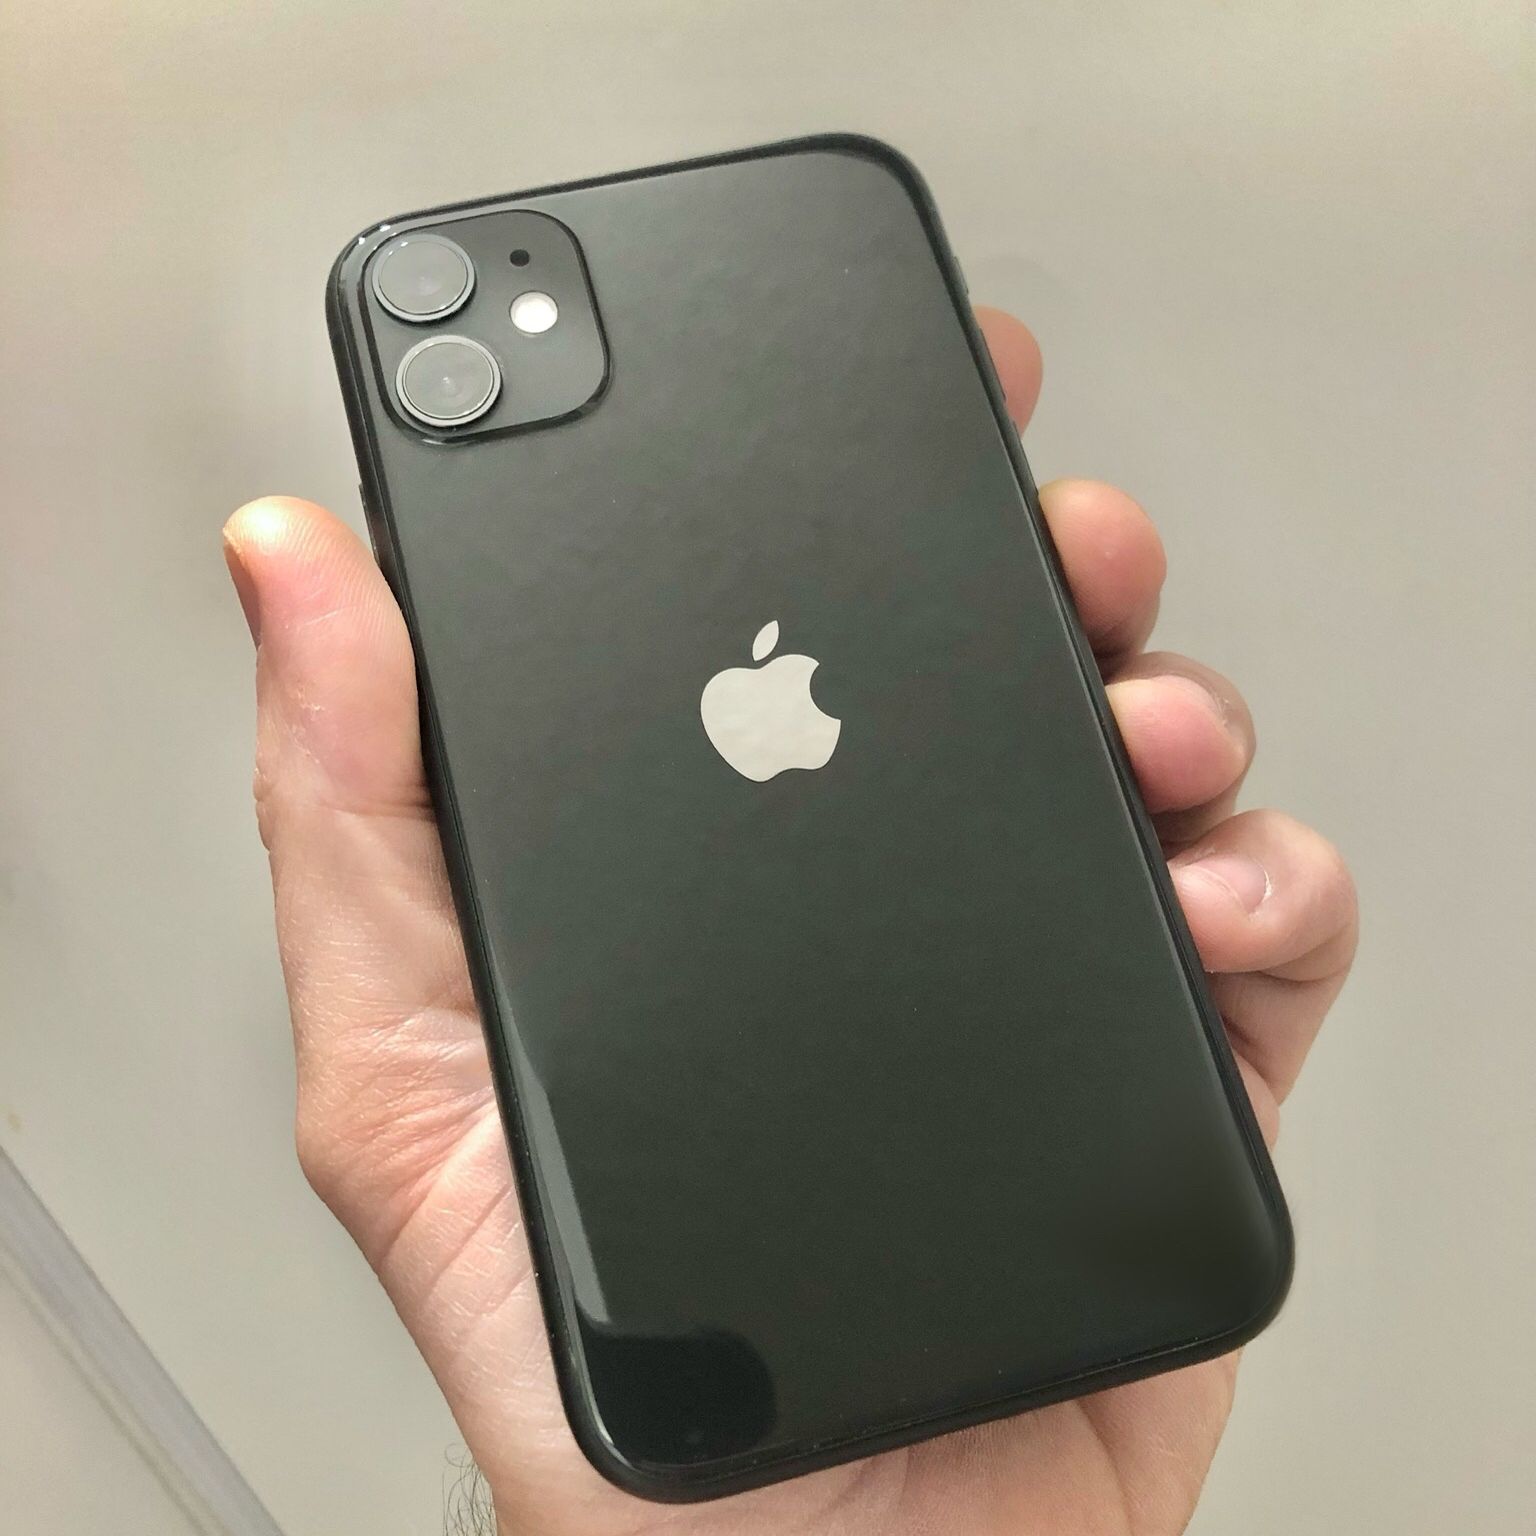 FIRM PRICE - iPhone 11 64gb Space Gray Factory Unlocked - VERY GOOD CONDITION  - Excellent Battery Health (5 Available)